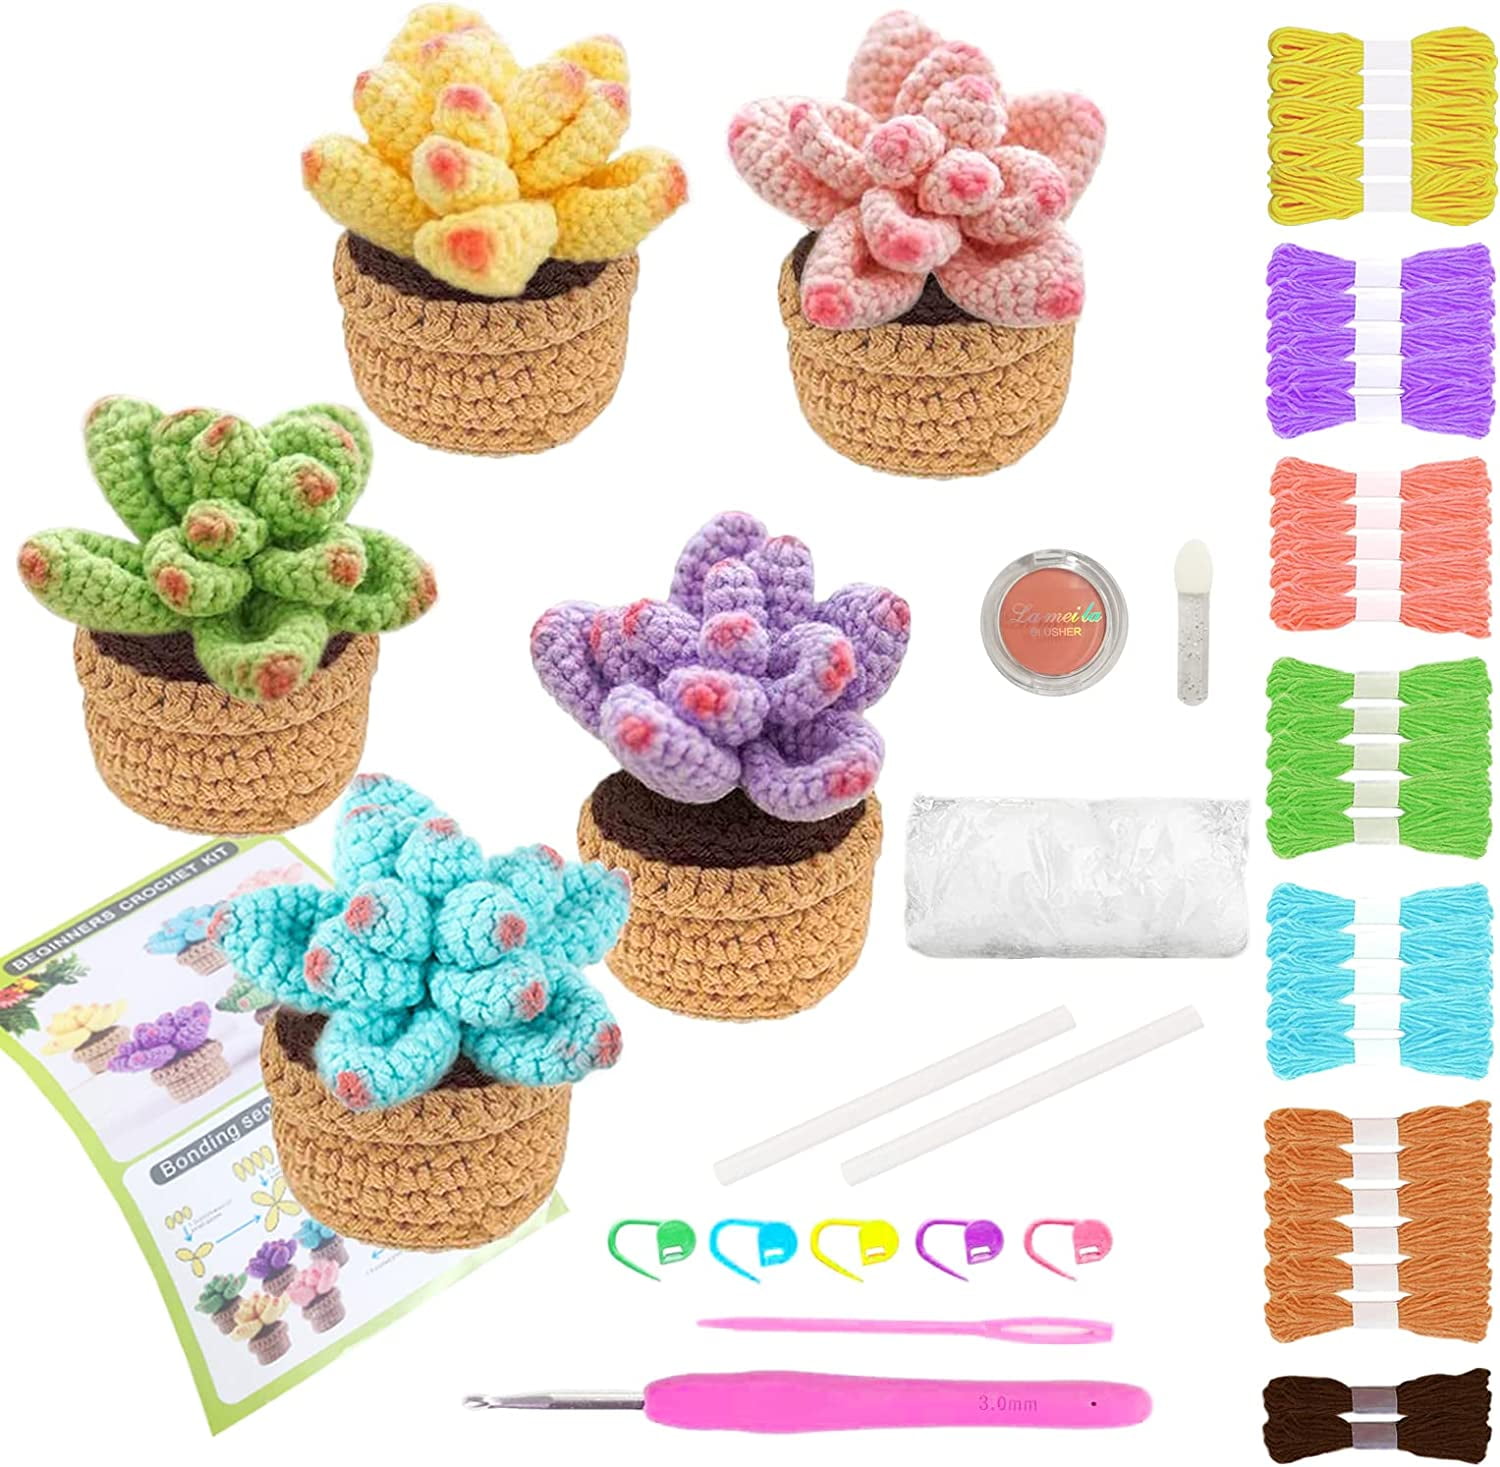 FECLOUD Crochet Knitting Kit for Beginners - 3Pcs Succulents, Step-by-Step  Video Tutorials, Learn to Knit Kits for Adults Beginner